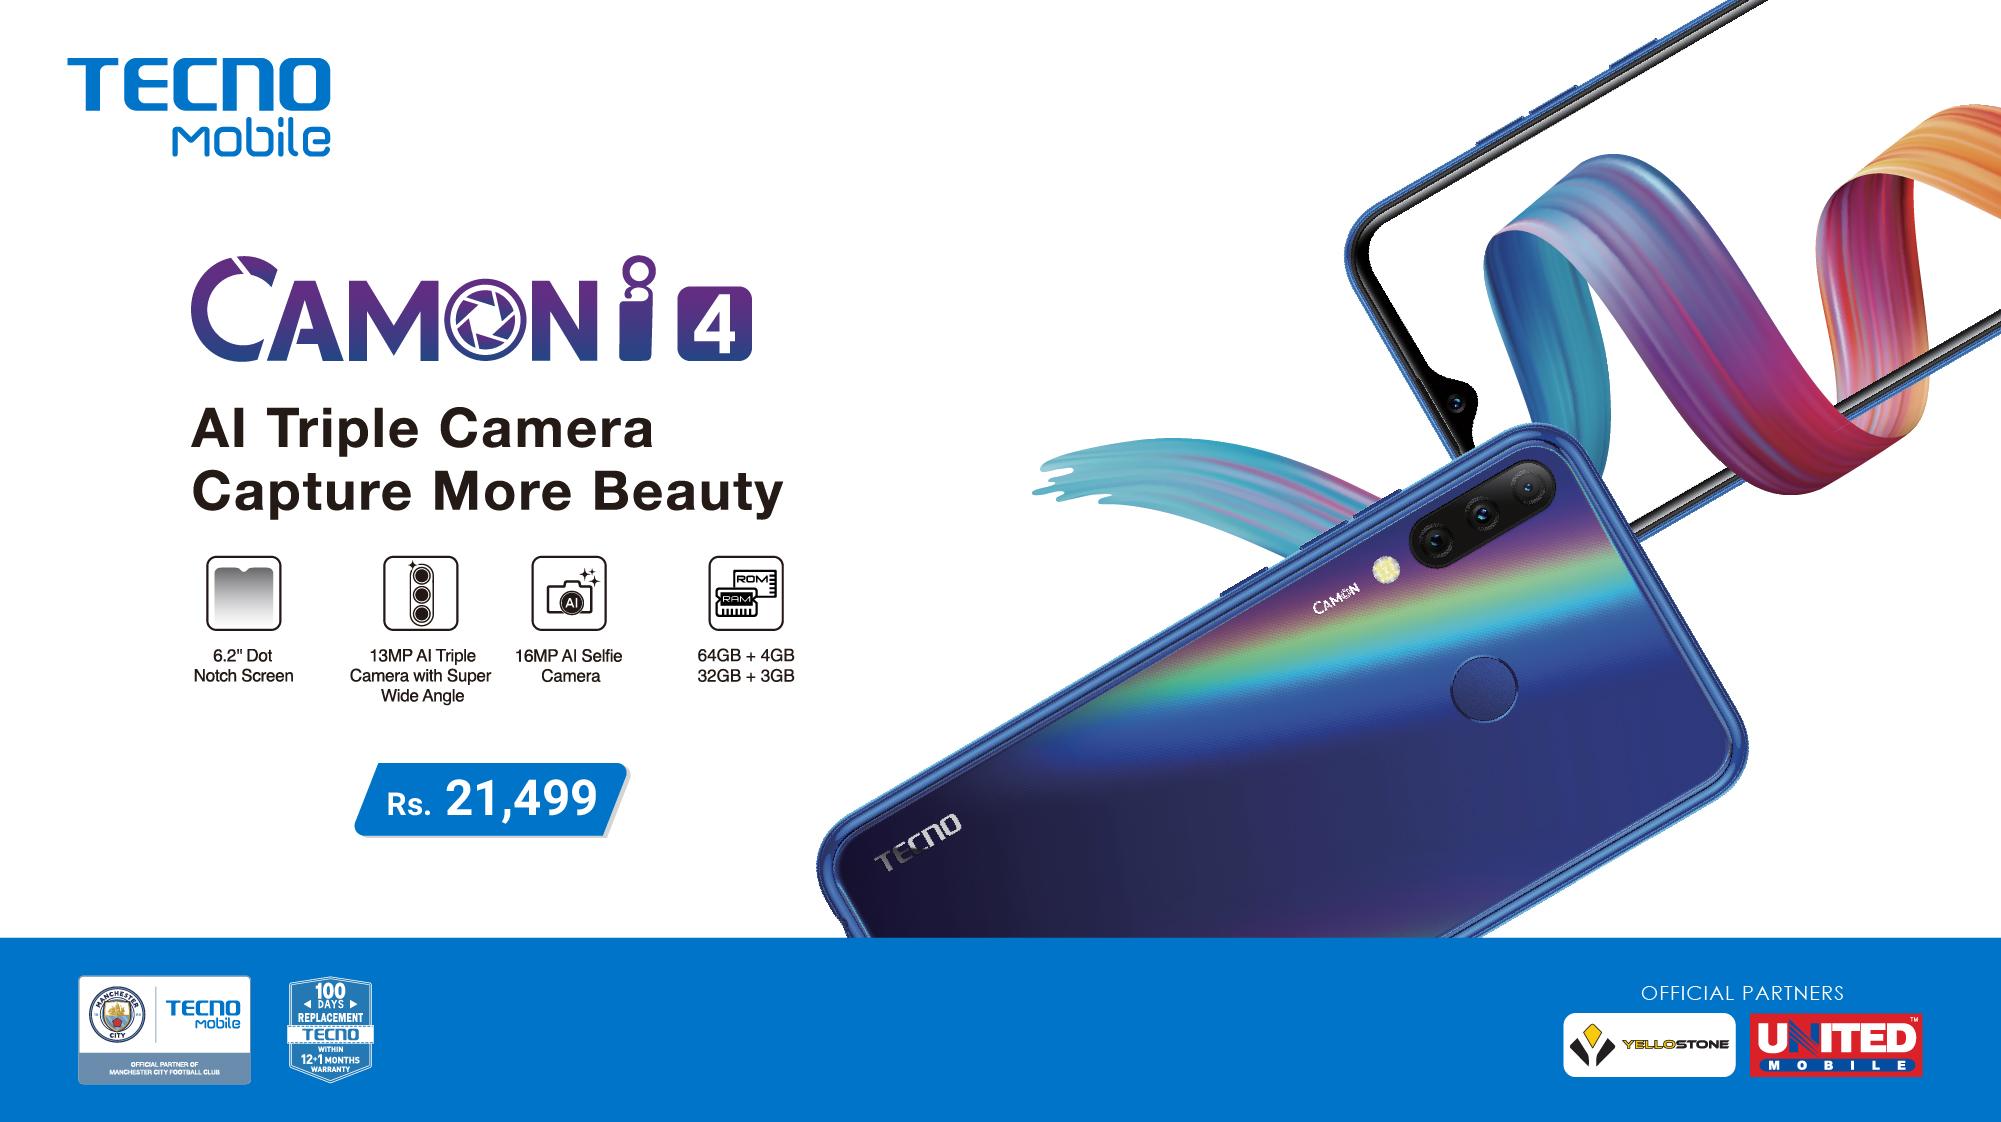 TECNO FINALLY UNVEILS CAMON i4 – ITS MUCH ANTICIPATED FIRST TRIPLE CAMERA PHONE WITH DROP NOTCH DISPLAY